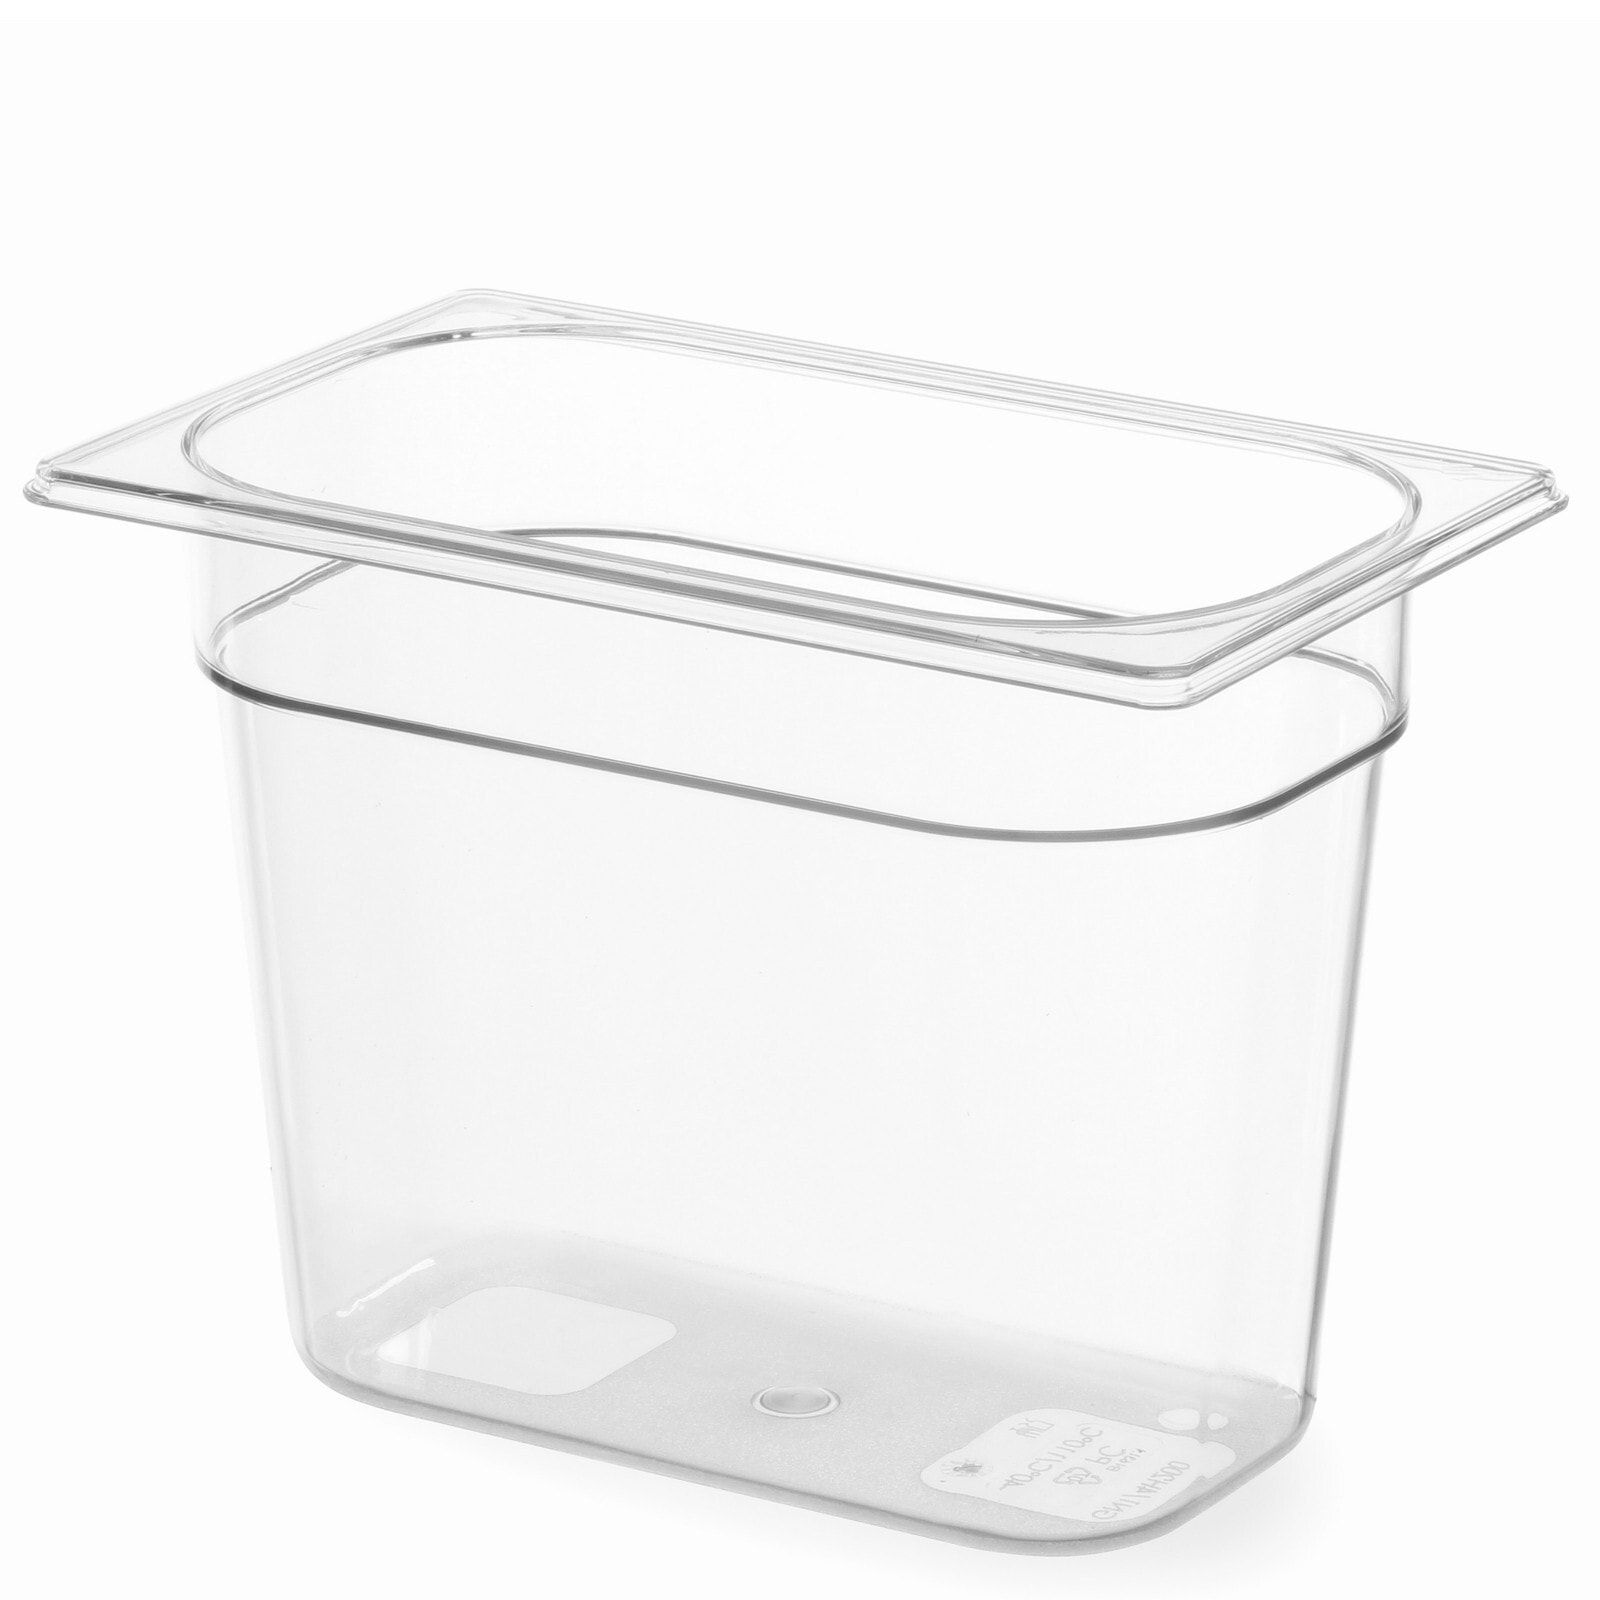 Transparent GN container made of polycarbonate 1/4 GN height 100 mm - Hendi 861622